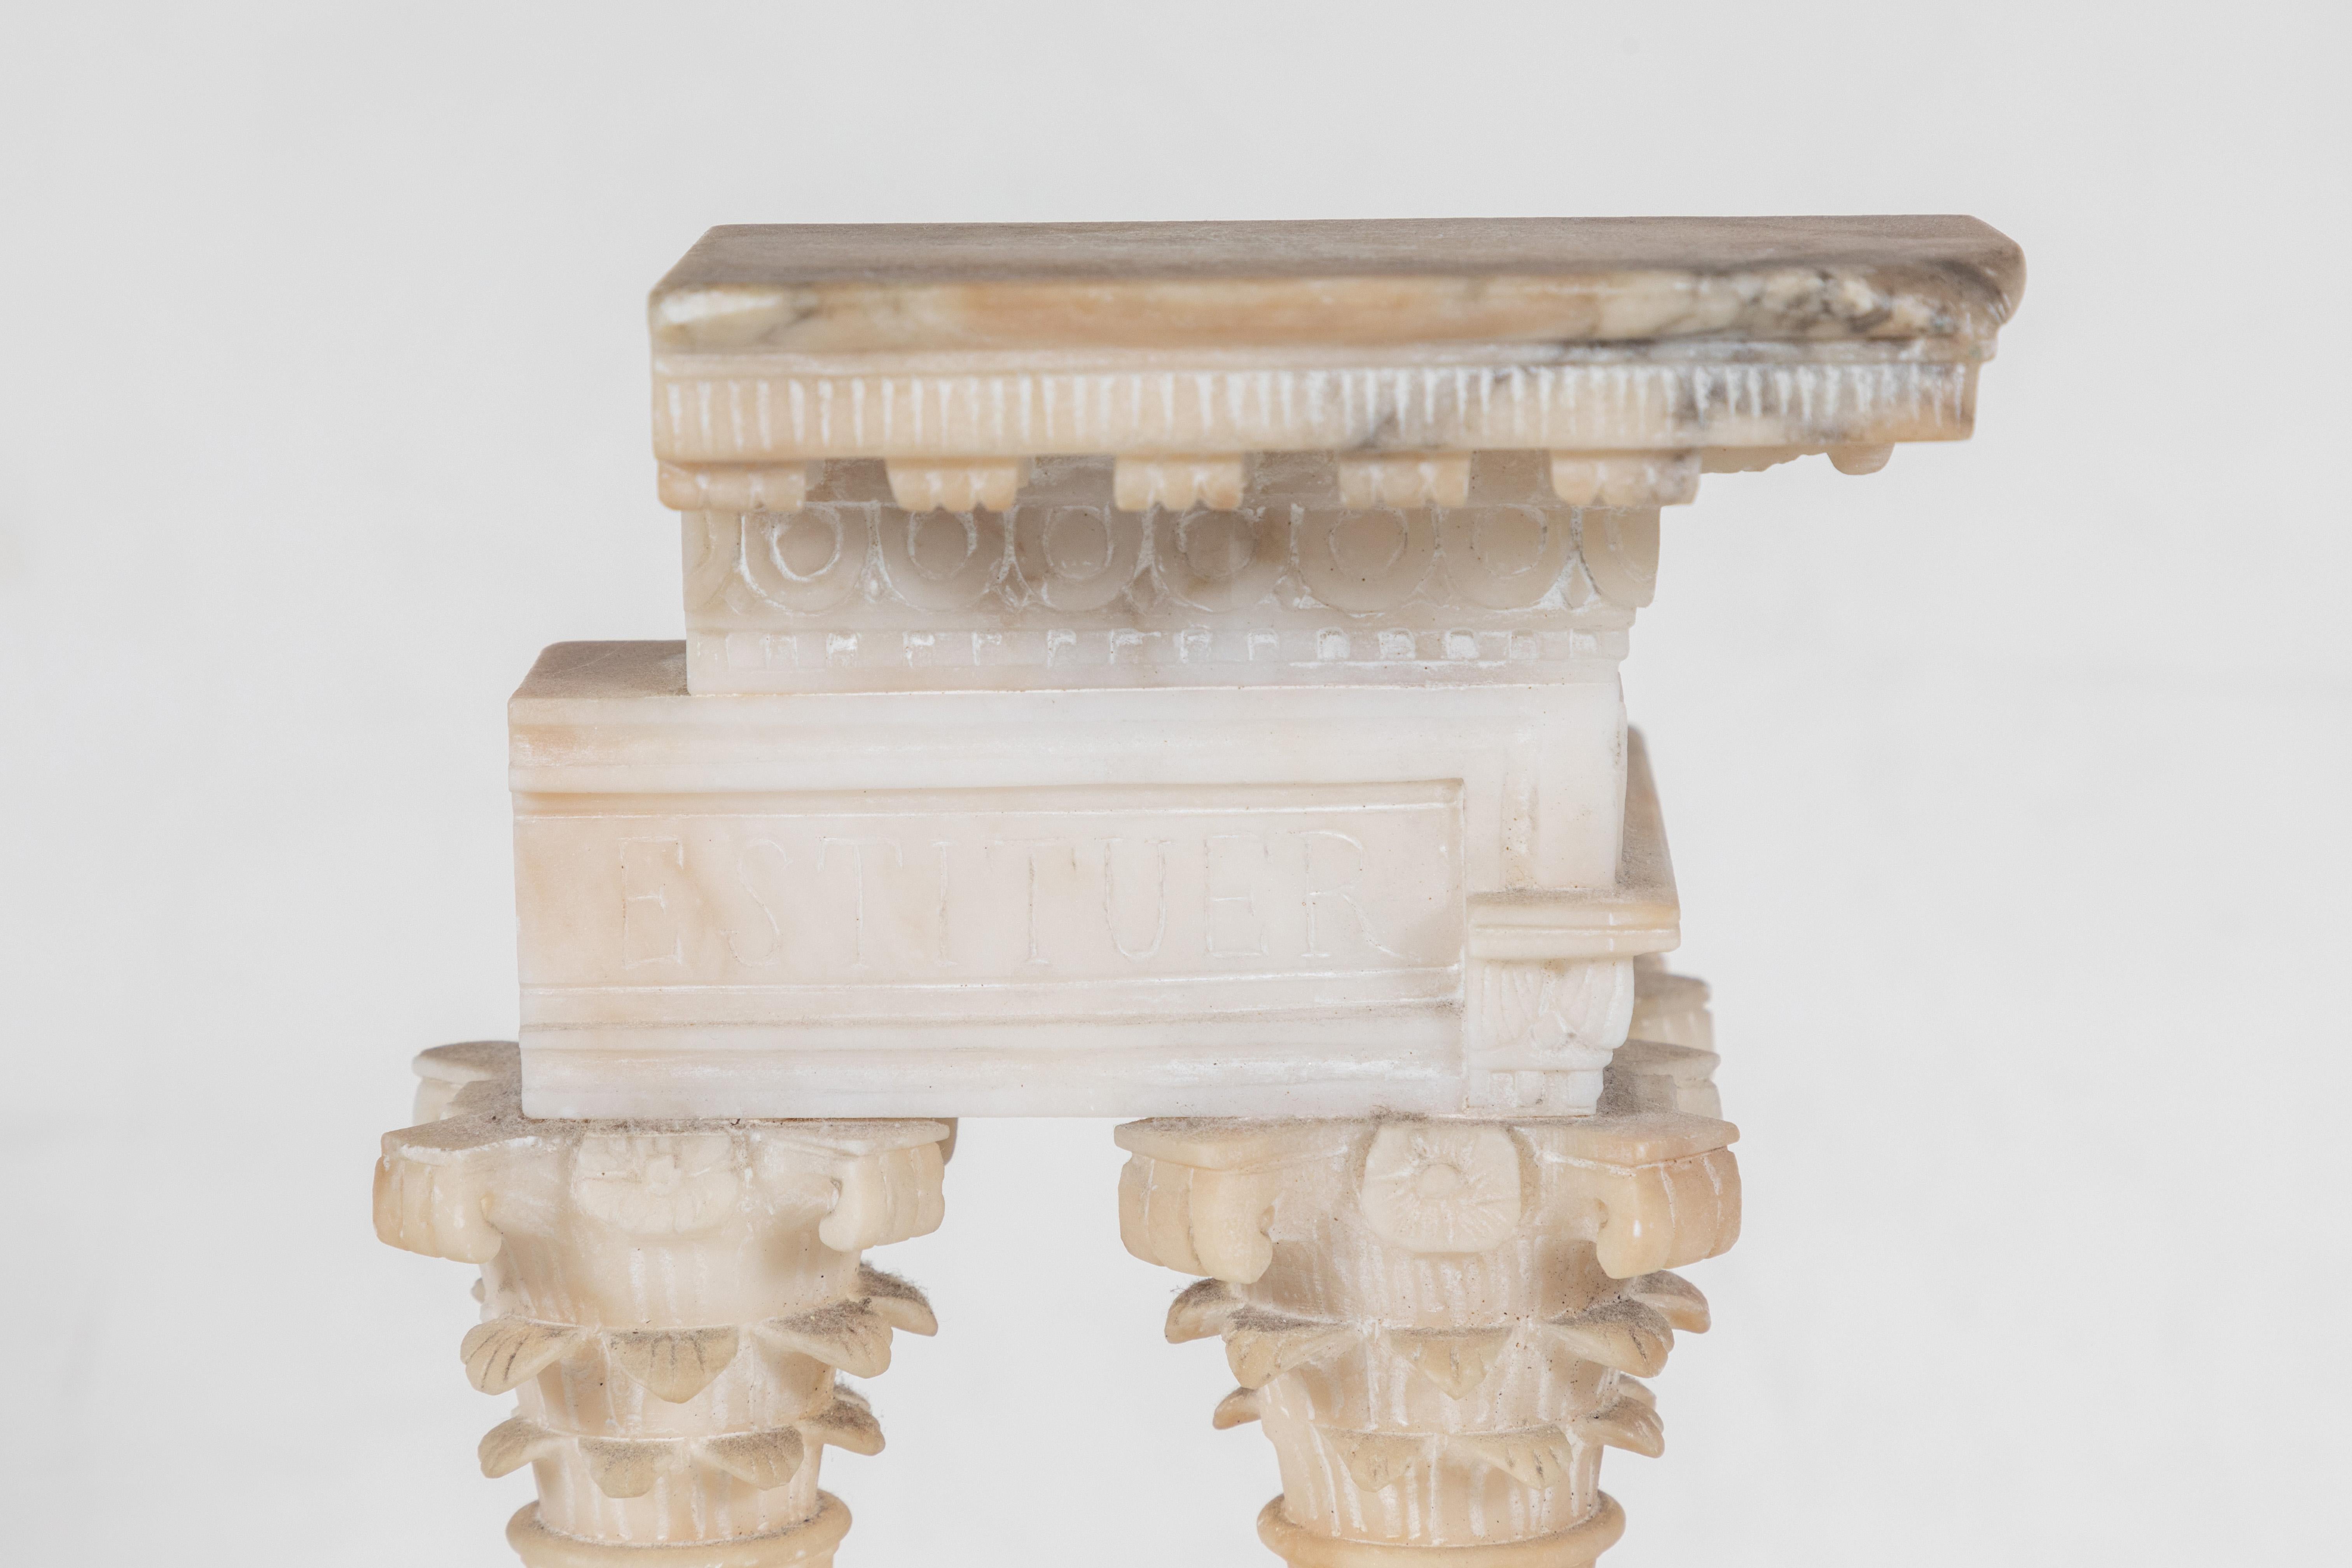 Beautifully carved, Grand Tour period architectural model featuring fluted columns surmounted by Corinthian capitals and a relief carved pediment above a raised  base inset with a flight of steps.  All resting on a marble base.